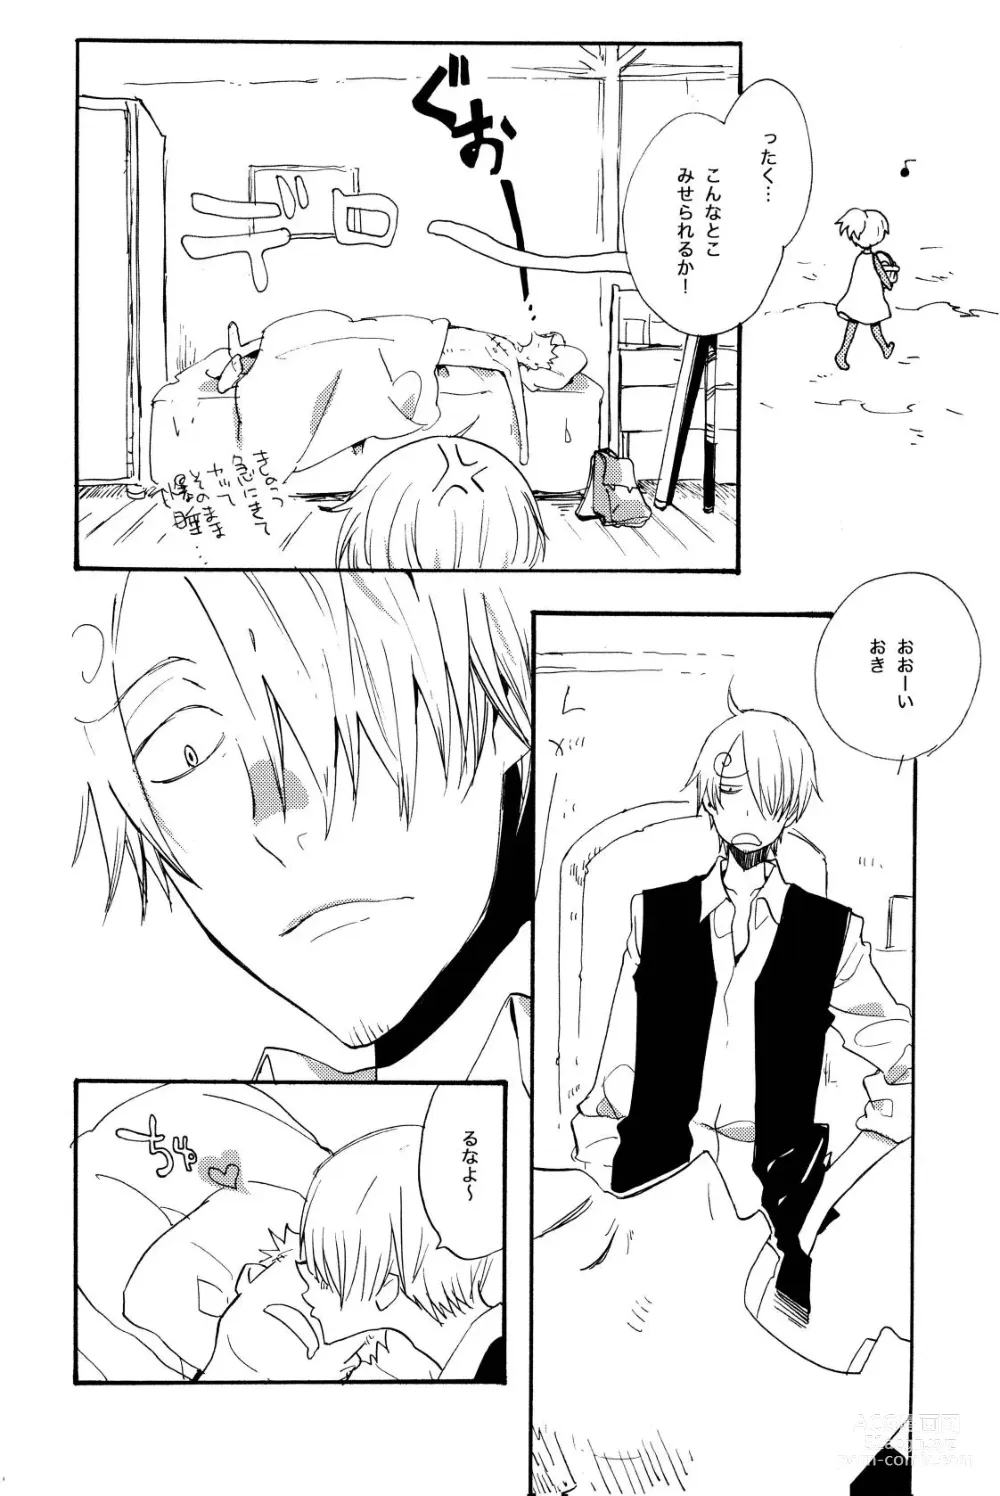 Page 15 of doujinshi 315569261second